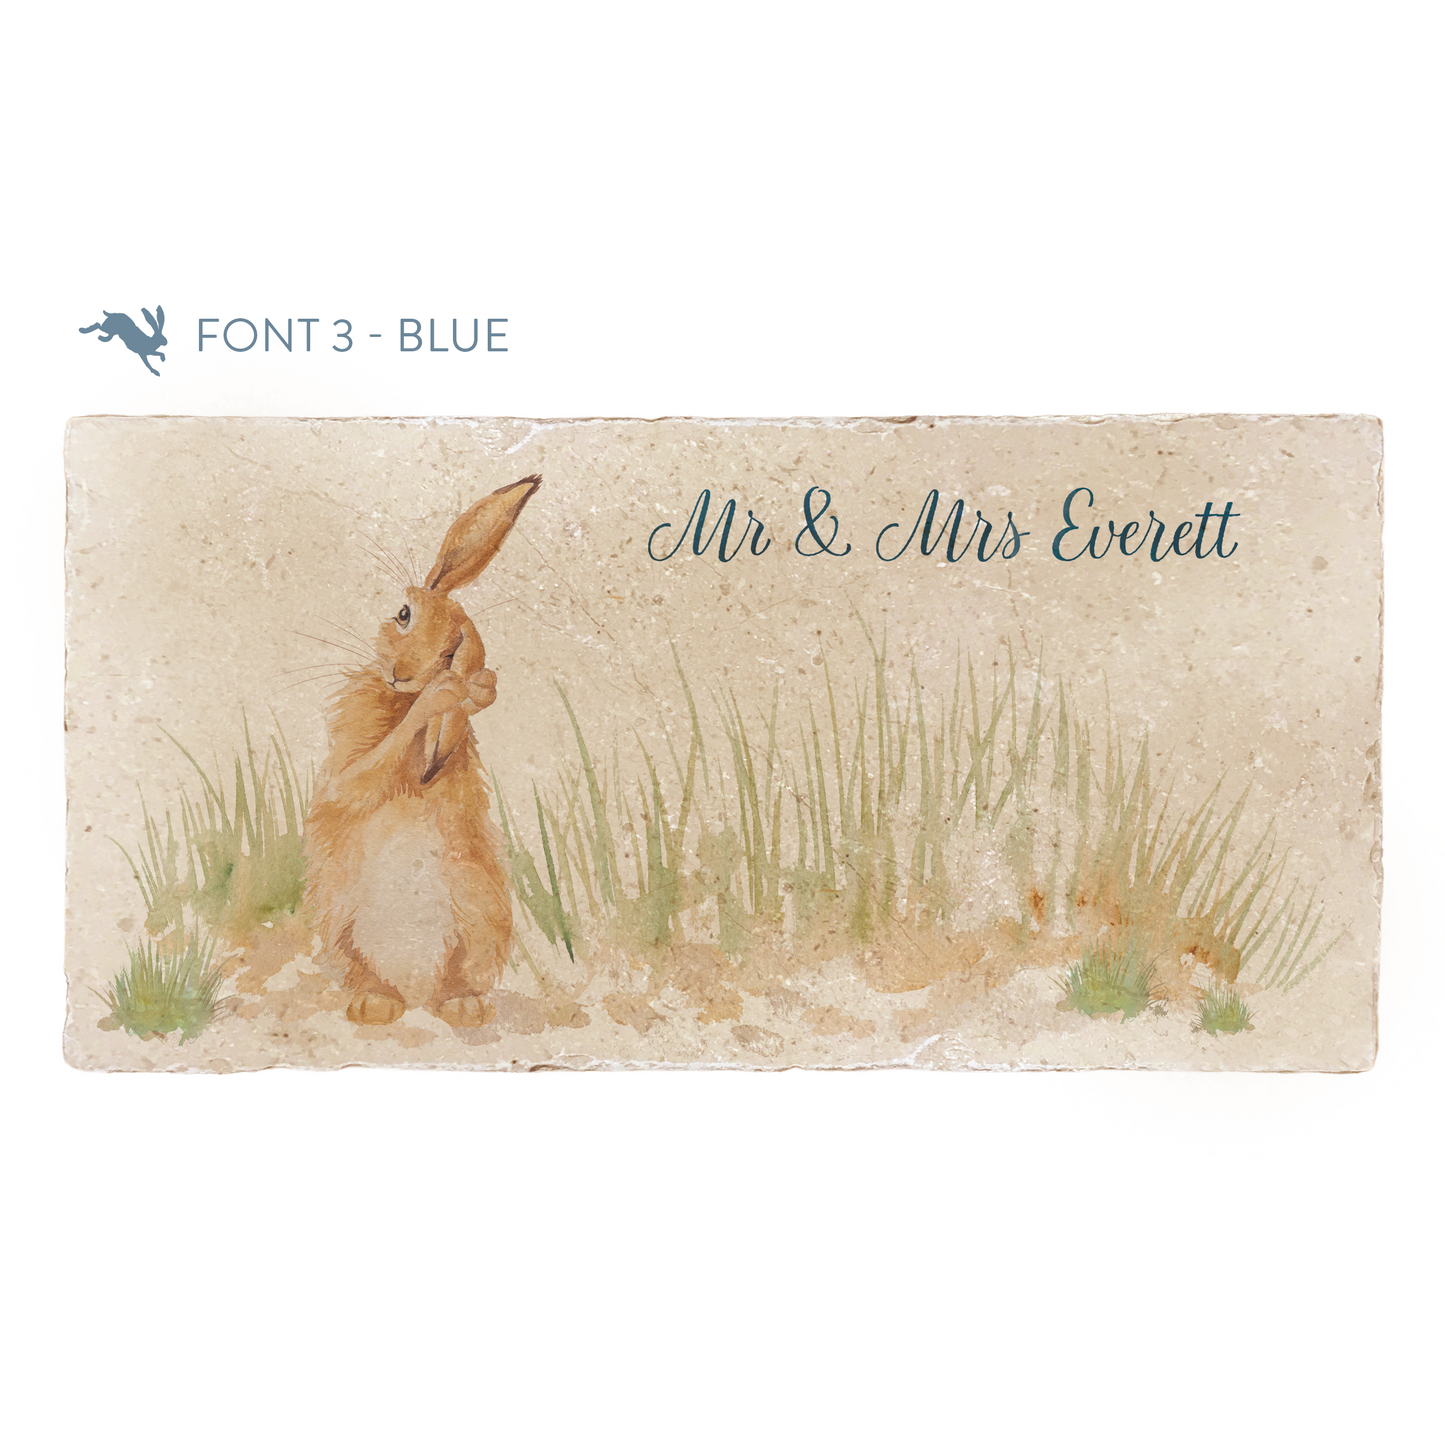 A personalised rectangular marble sharing platter featuring a hare washing his ear in a watercolour style. The example personalised dark blue text reads ‘Mr & Mrs Everett’ in a modern script font.